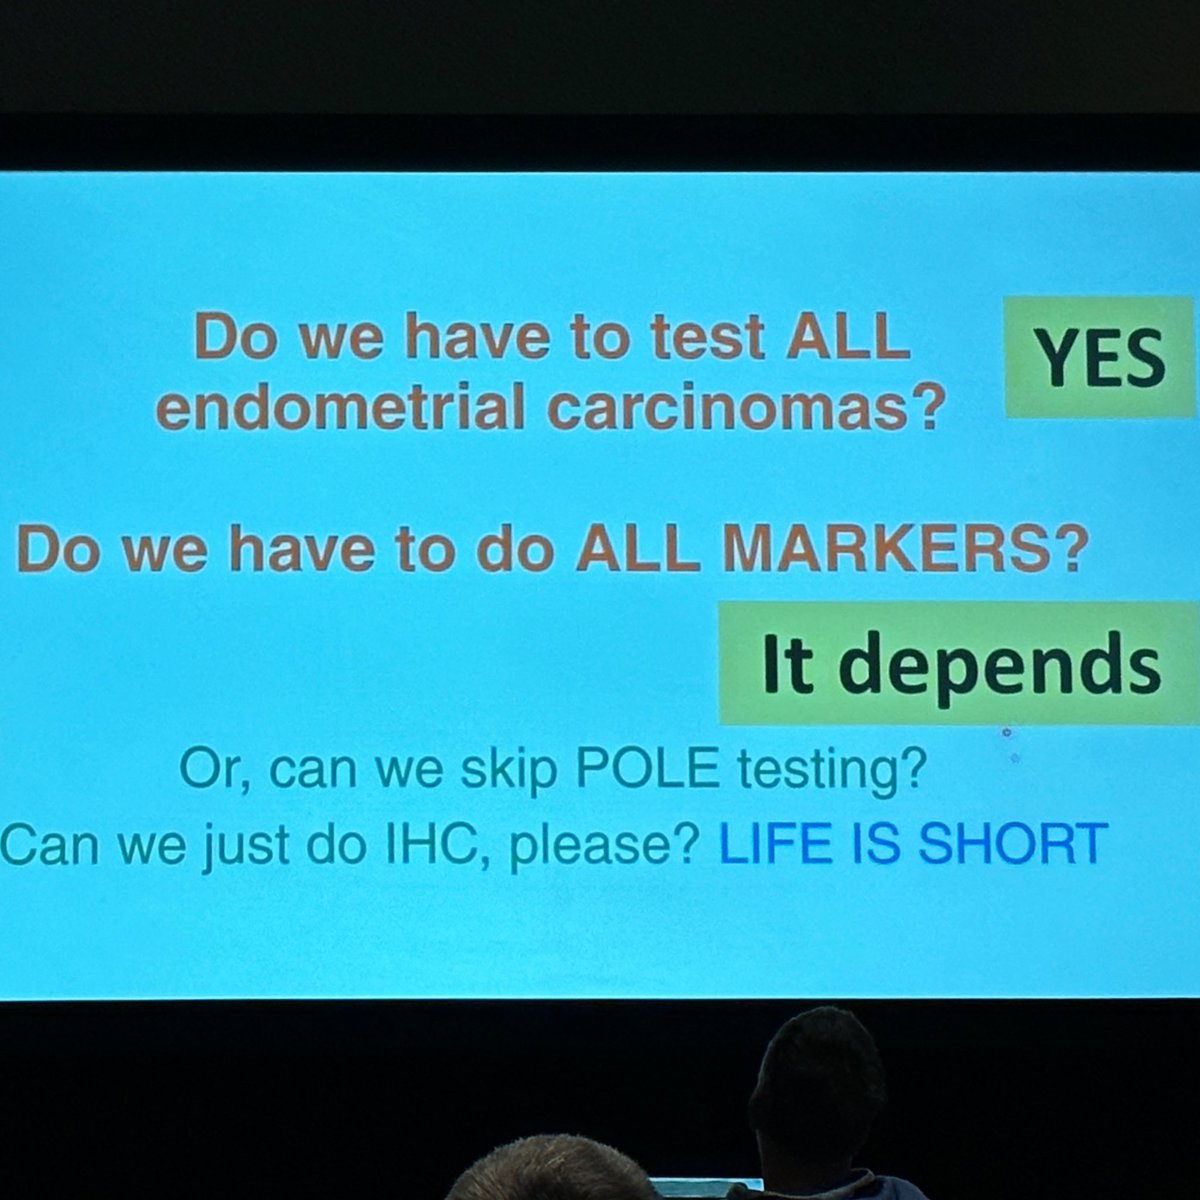 Can we skip the POLE testing? NO, unless it is a Low-risk #endometrialcarcinoma case! #GYNpath #PathTwitter ~ Now at the #Uscap2023 #Uscap23 by @CPHpath #shortcourse 👏🏻